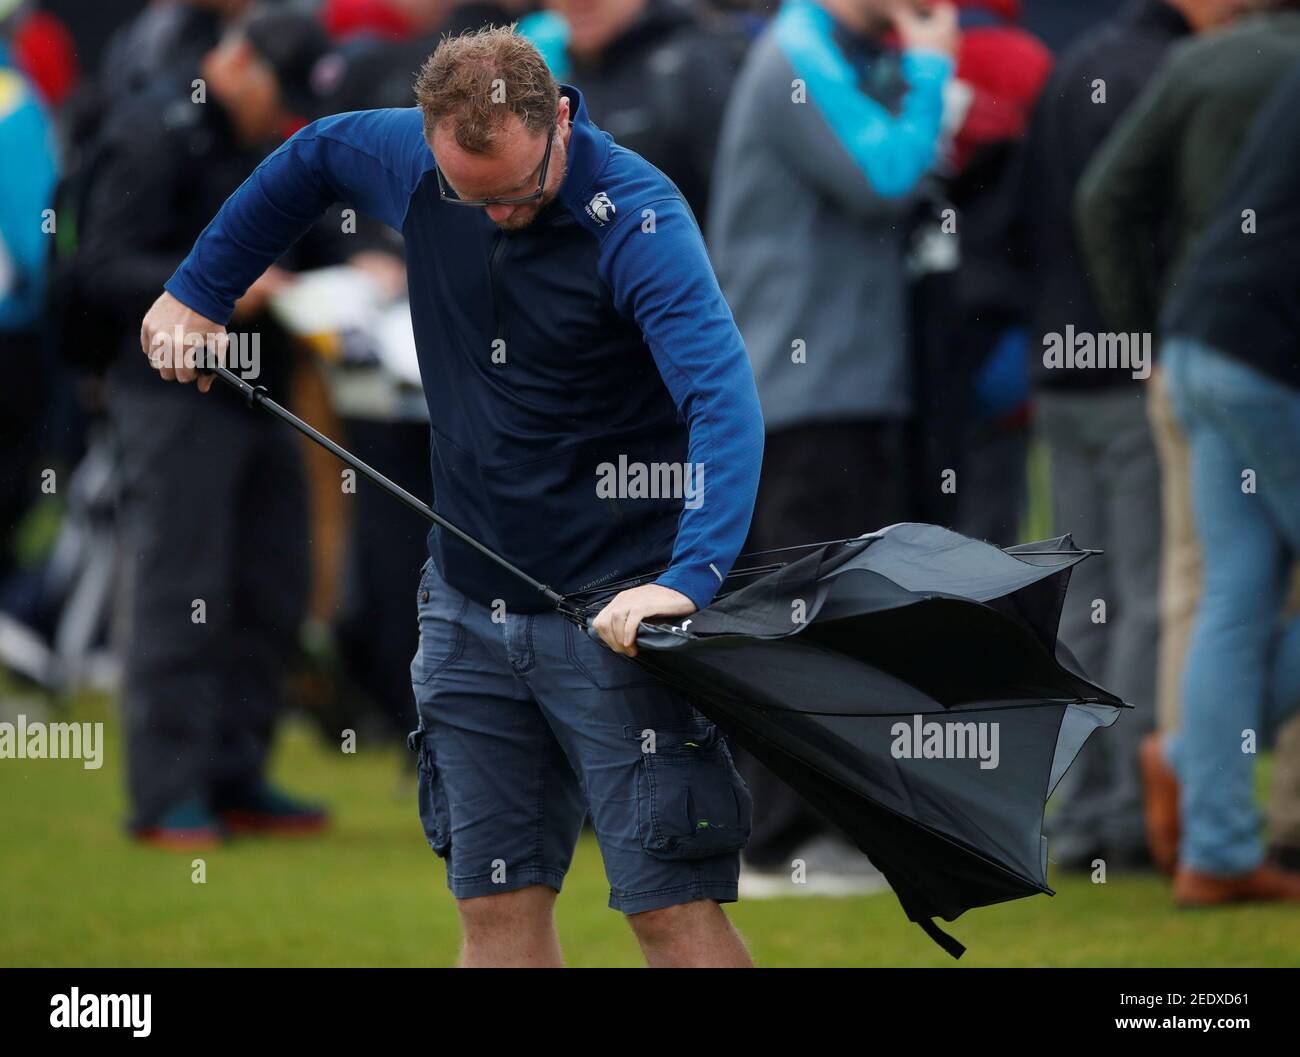 Page 11 - Spectator Golf High Resolution Stock Photography and Images -  Alamy